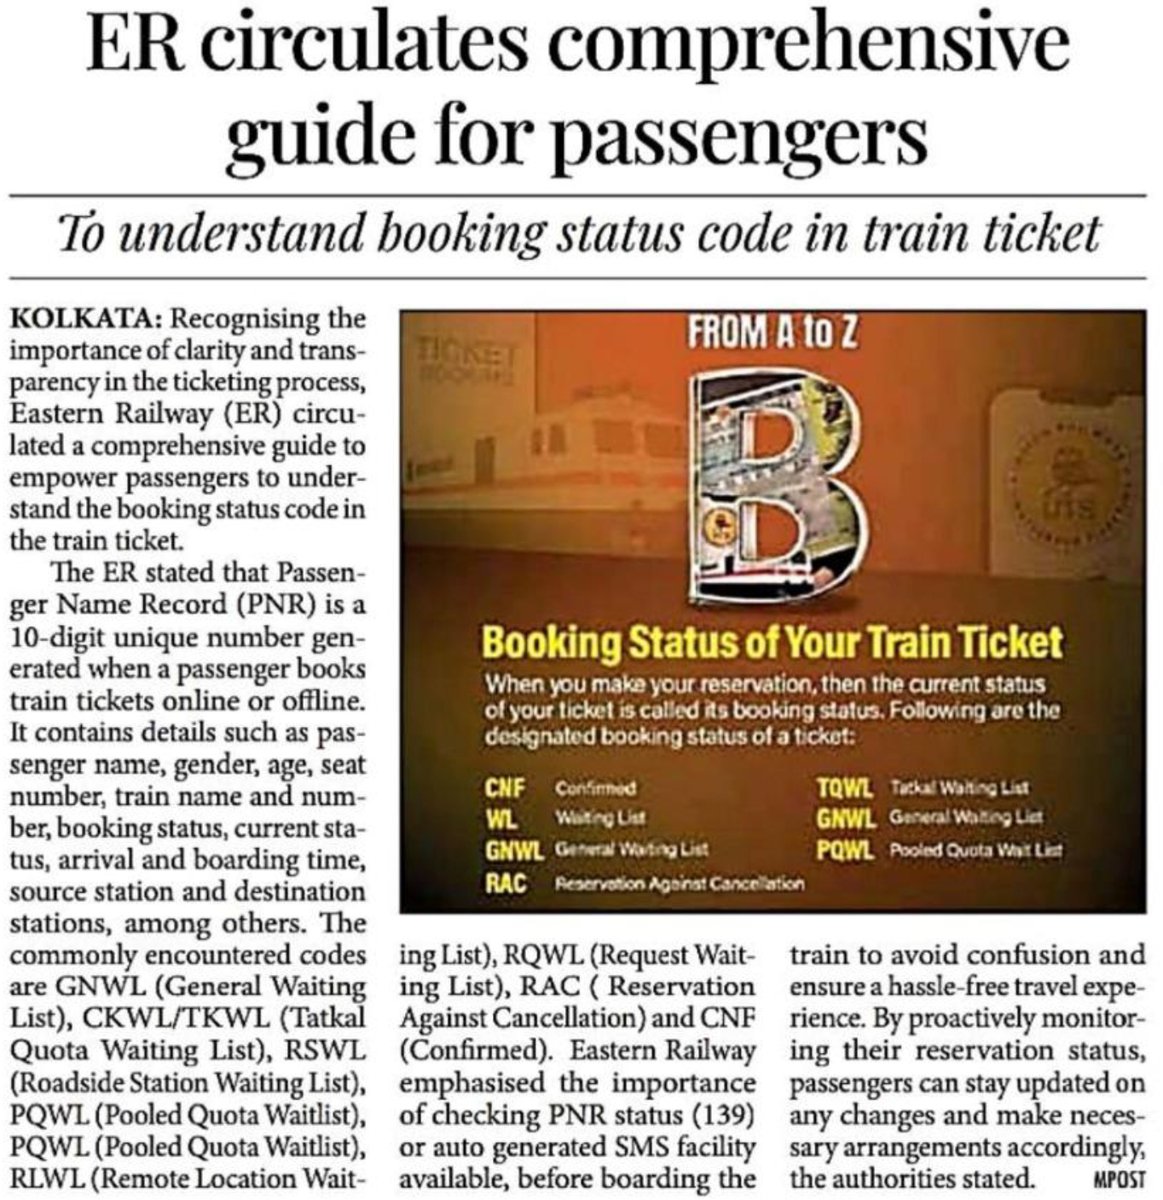 ER circulates comprehensive guide for passengers